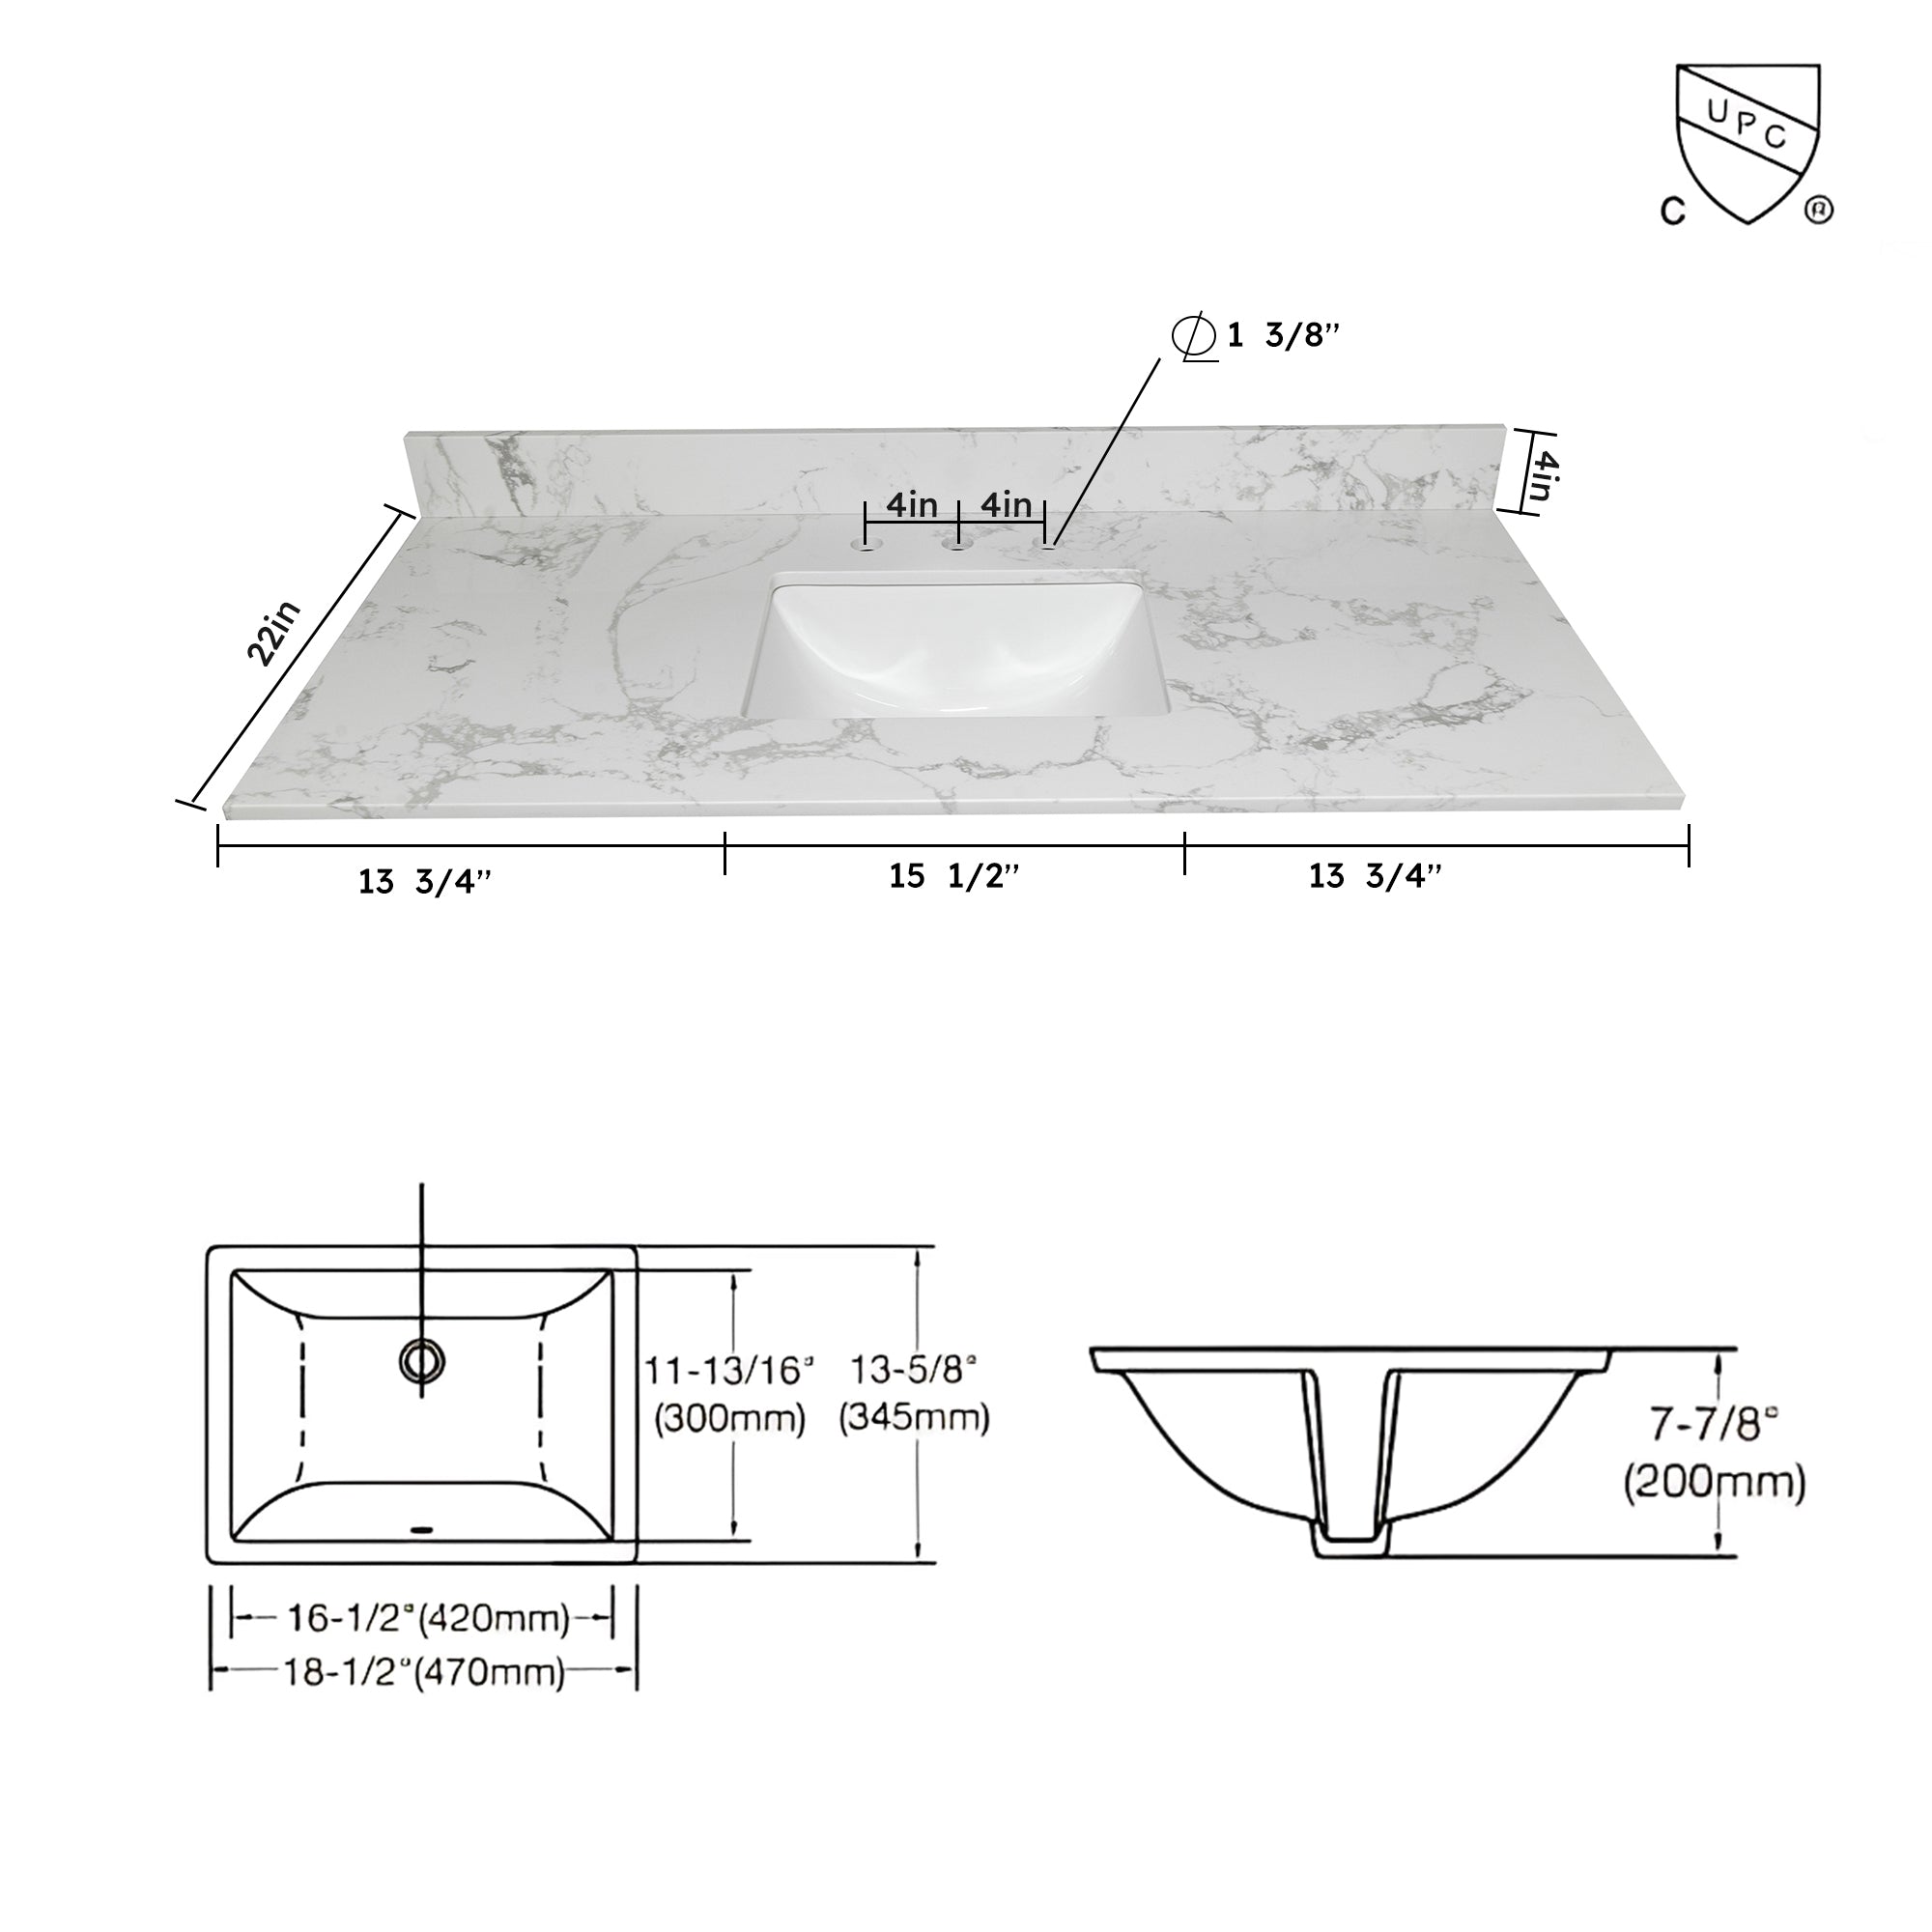 43" x 22" bathroom stone vanity top  engineered stone carrara white marble color with rectangle undermount ceramic sink and  3 faucet hole with back splash .